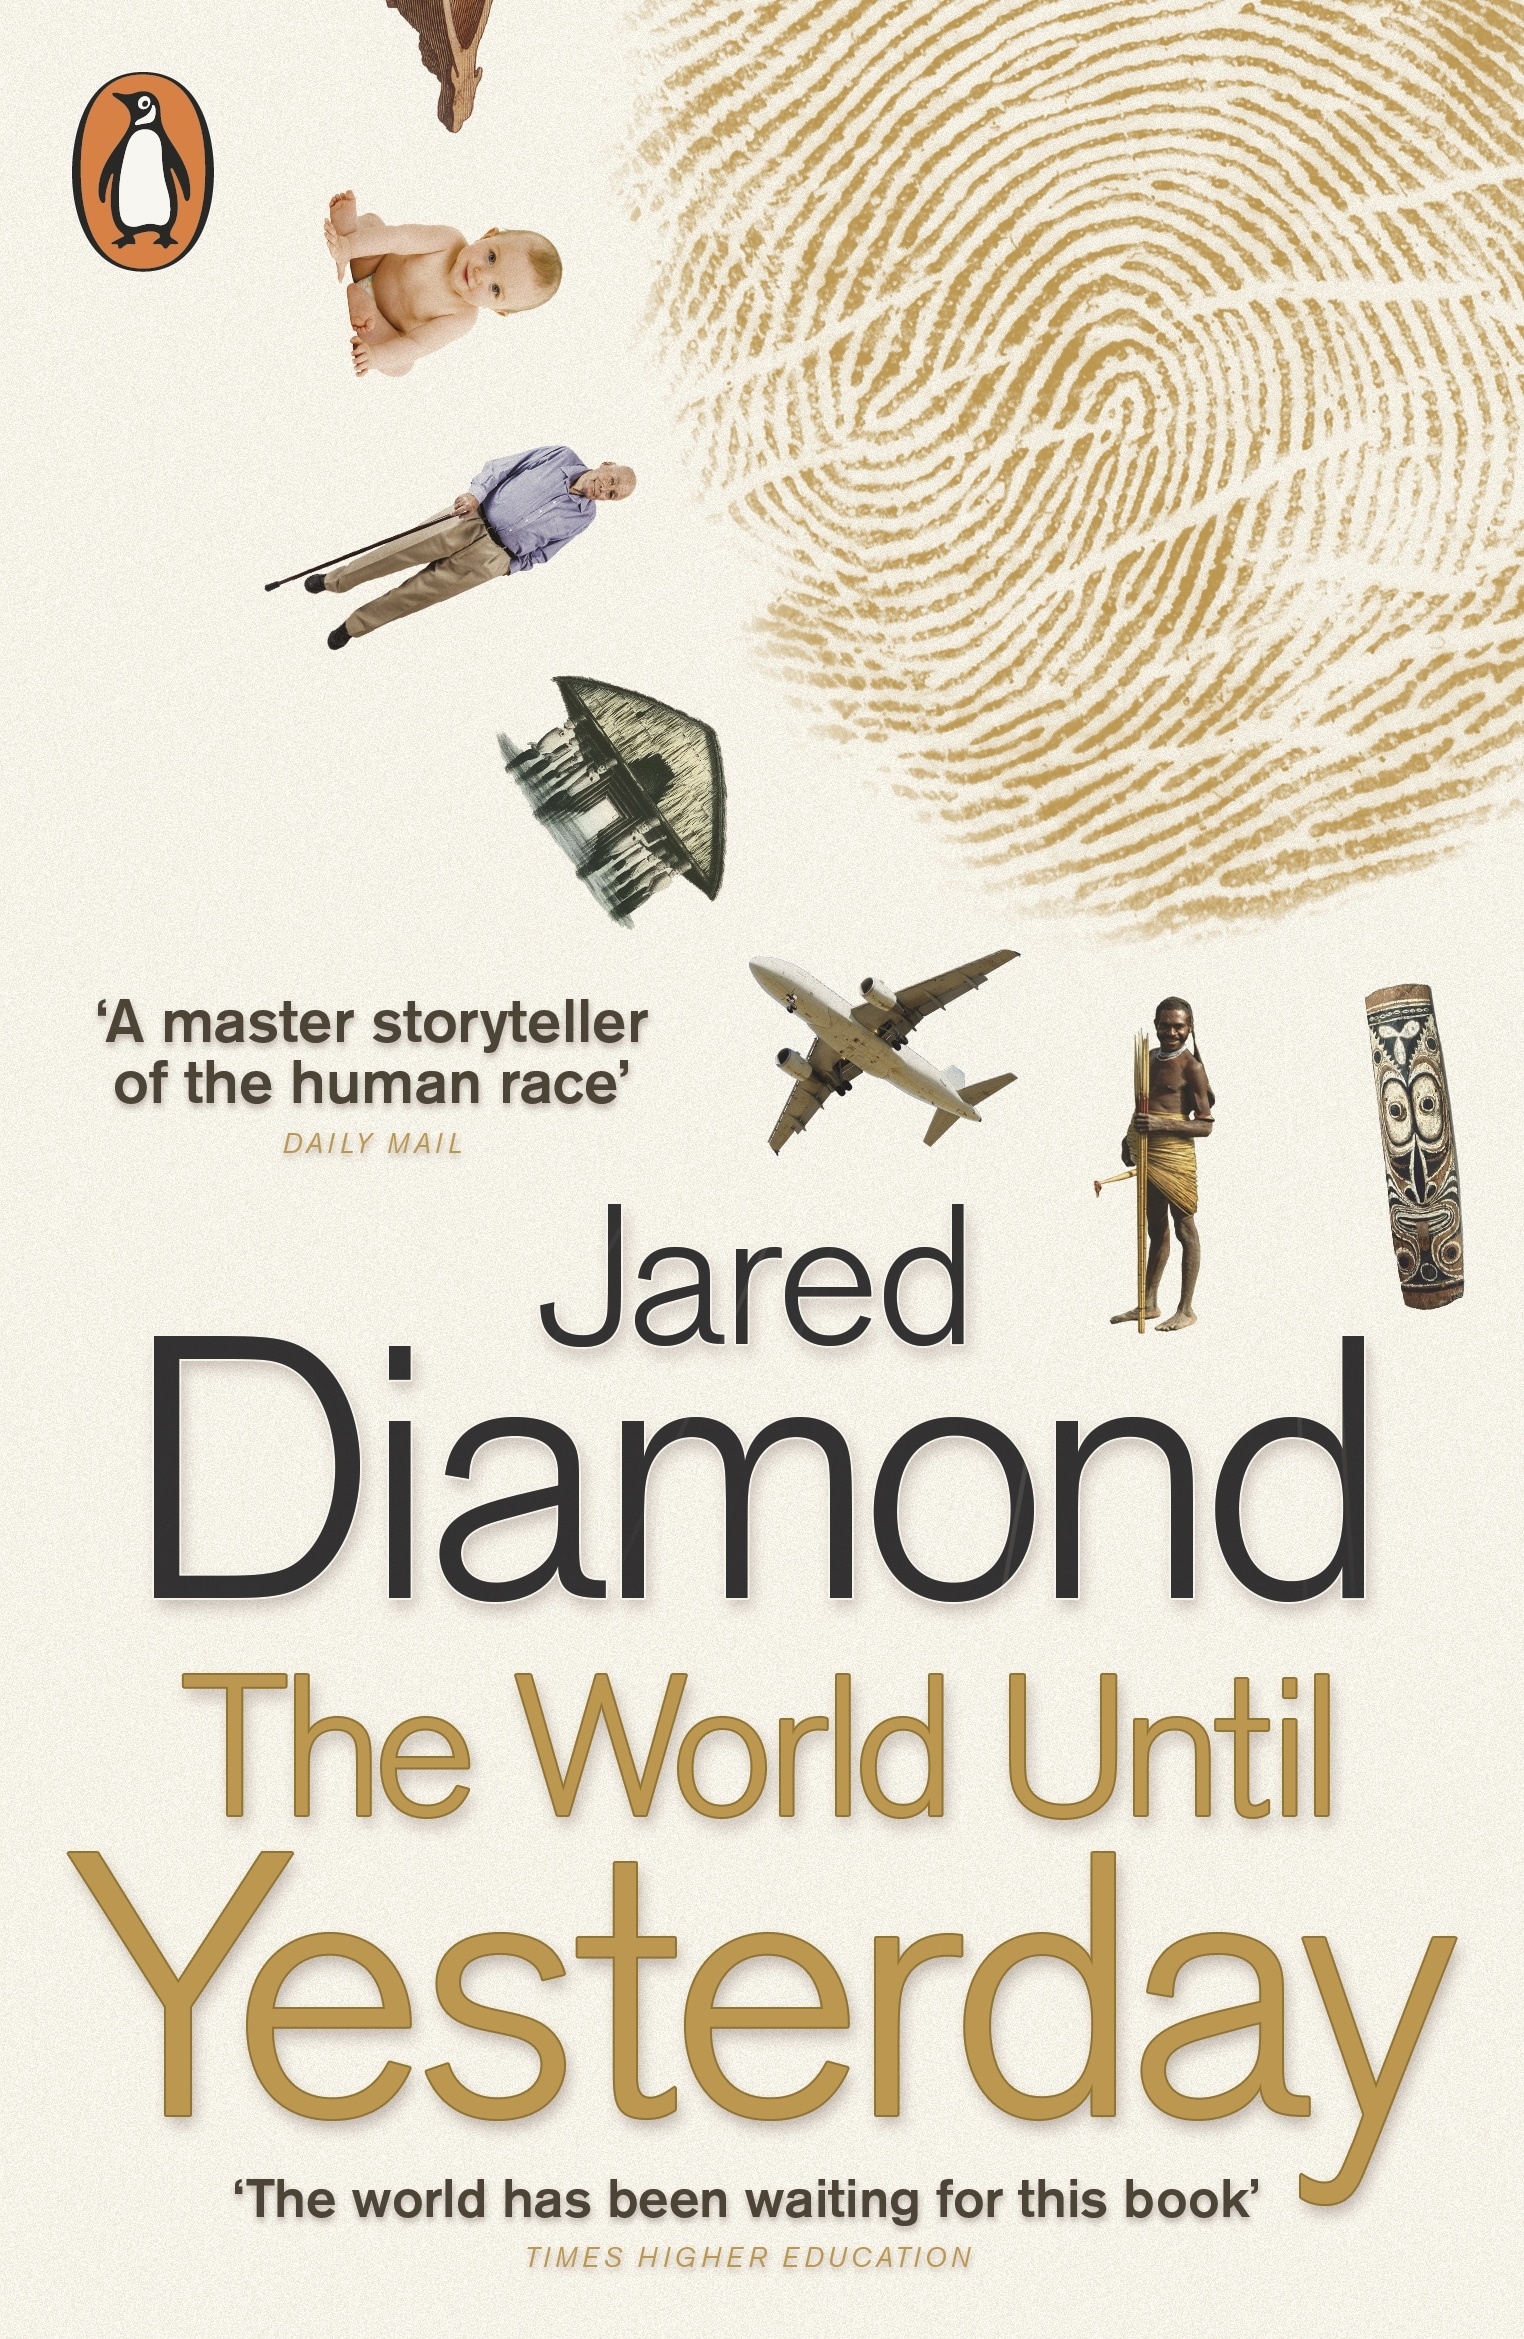 Book “The World Until Yesterday” by Jared Diamond — September 5, 2013